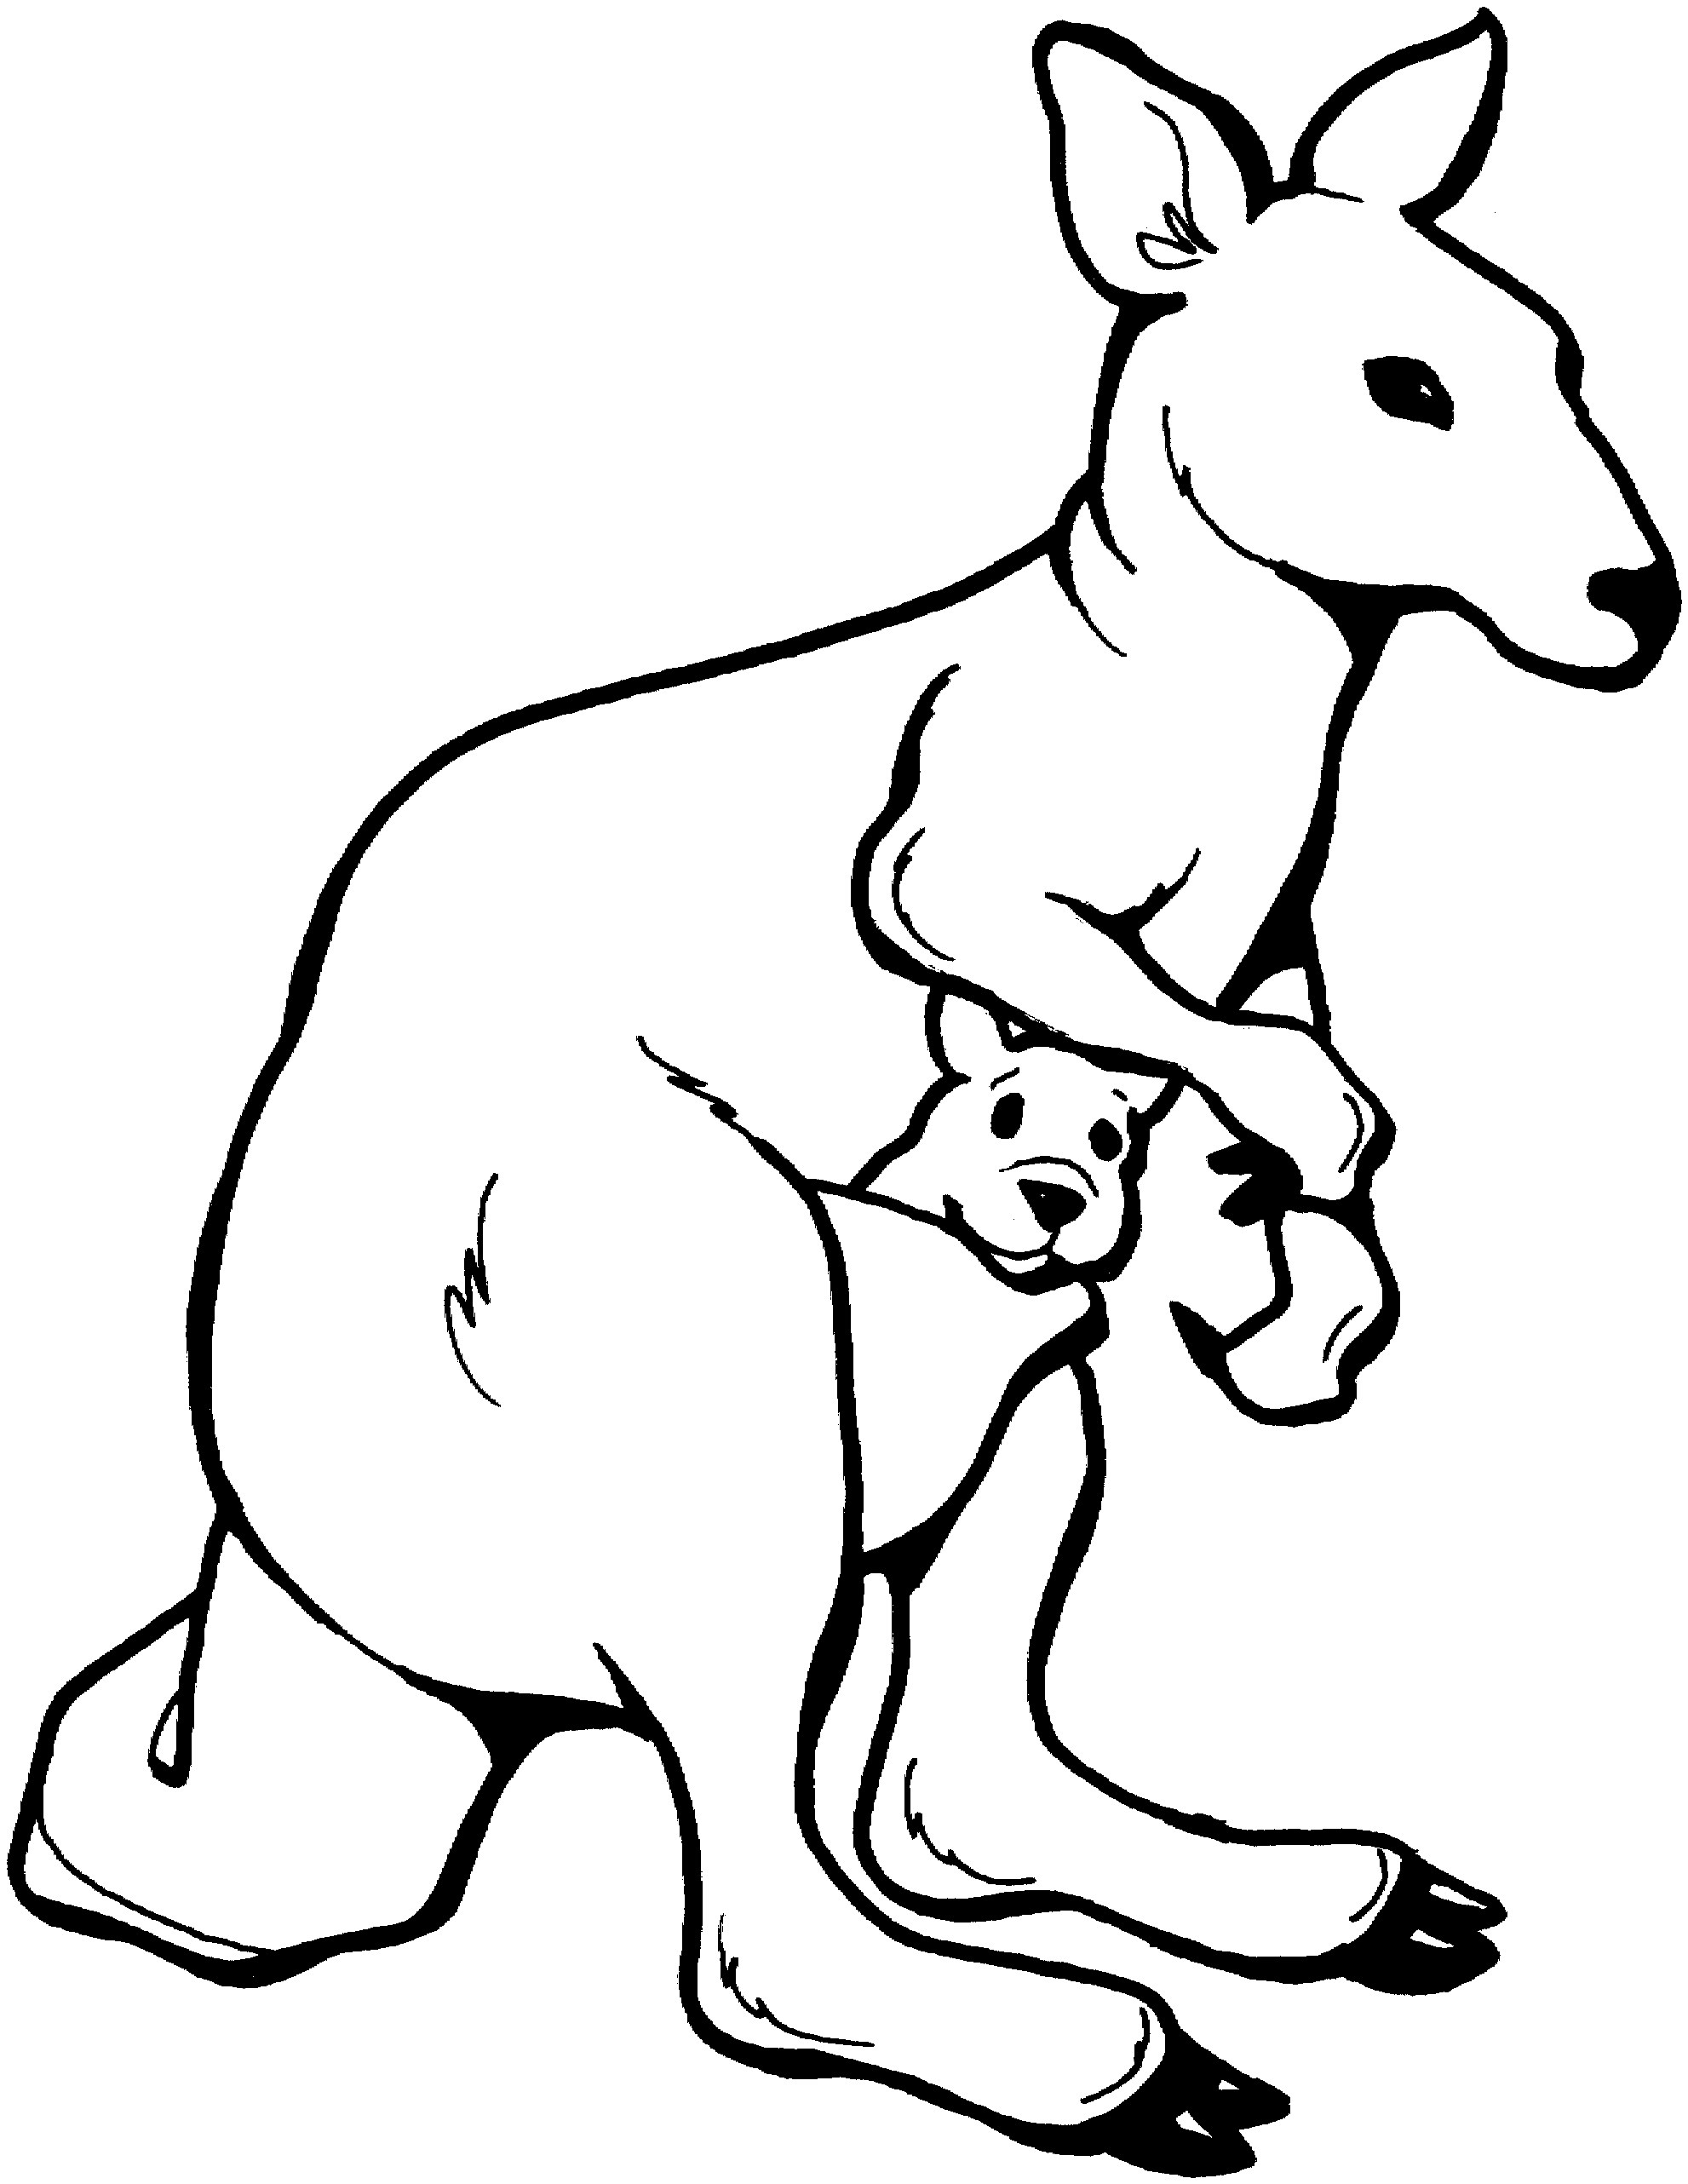 Kangaroo clipart black and white. Free images wikiclipart 